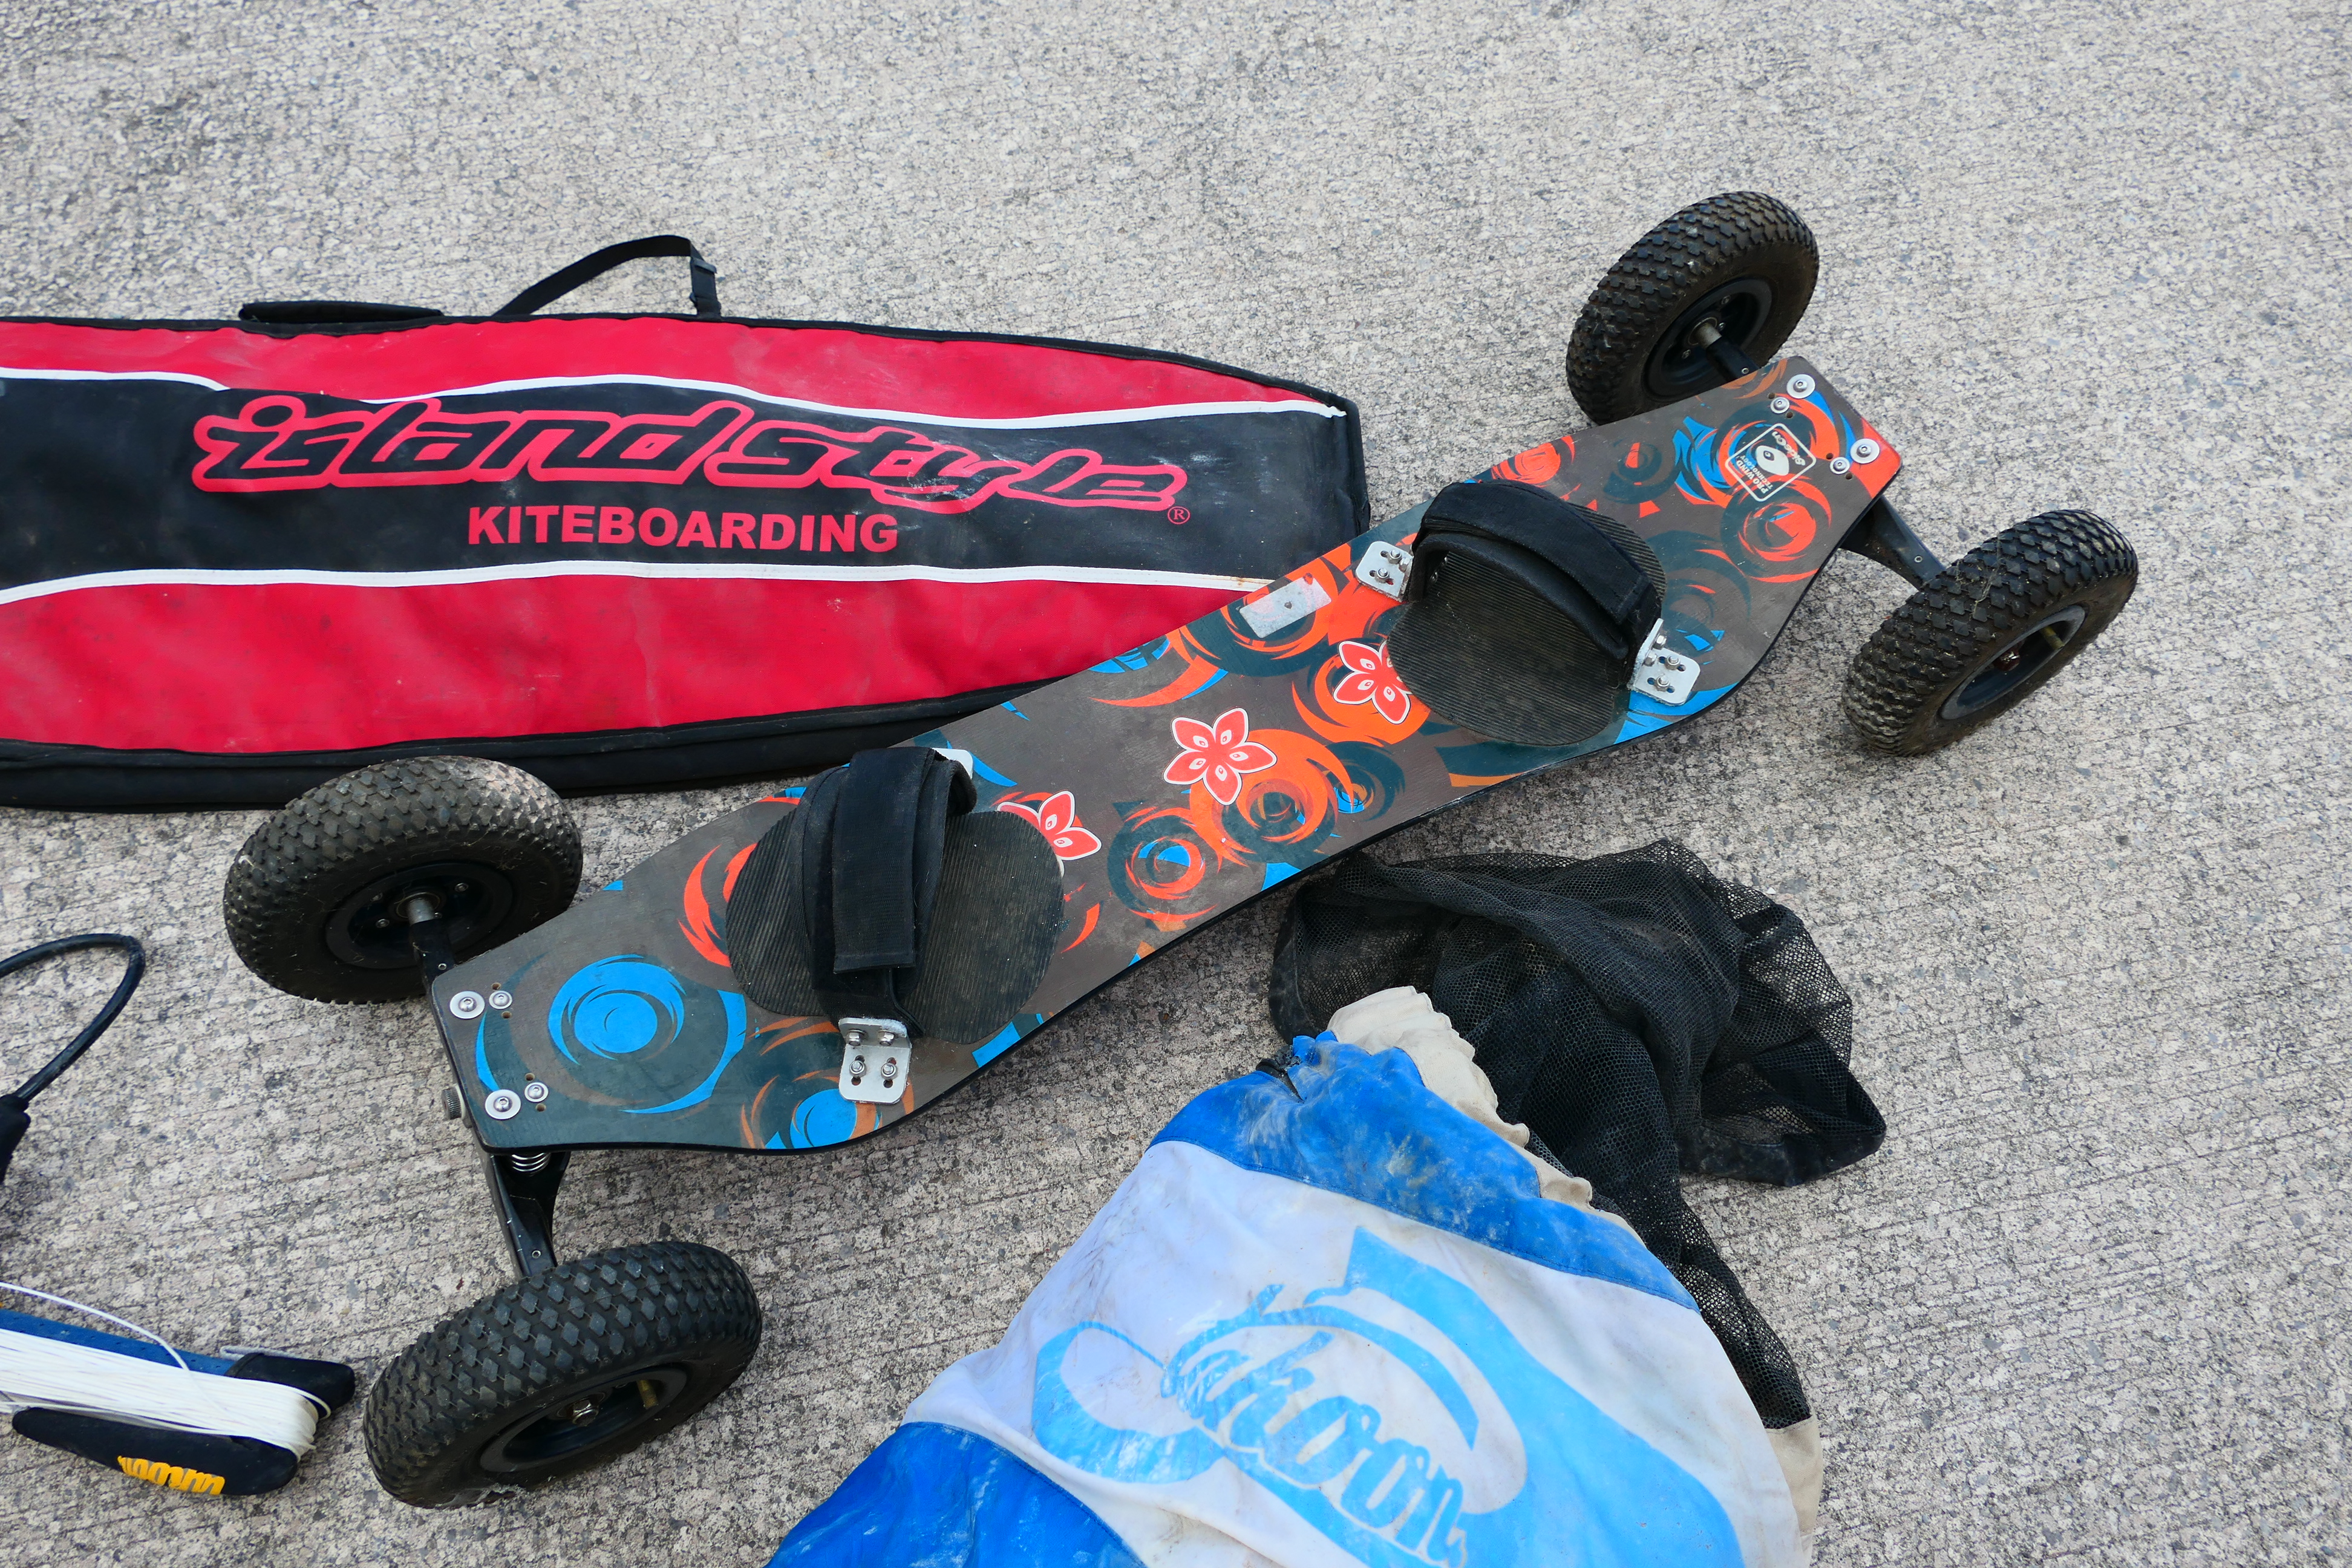 A collection of kite surfing equipment and accessories. - Image 6 of 7